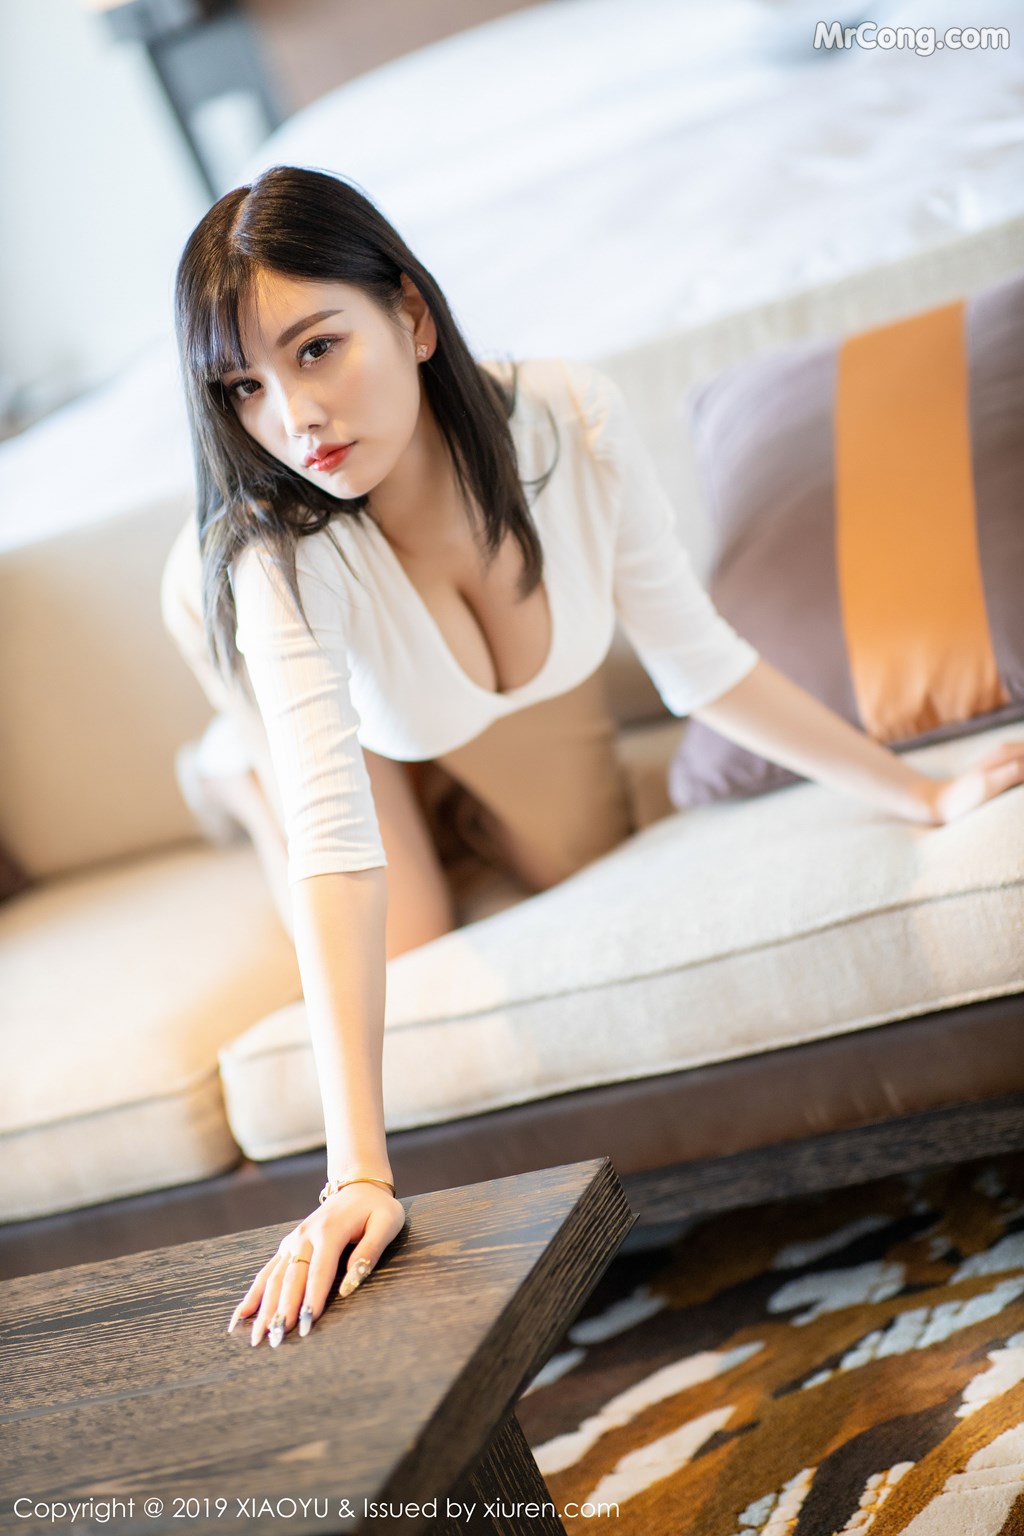 XiaoYu Vol.219: Yang Chen Chen (杨晨晨 sugar) (62 pictures)